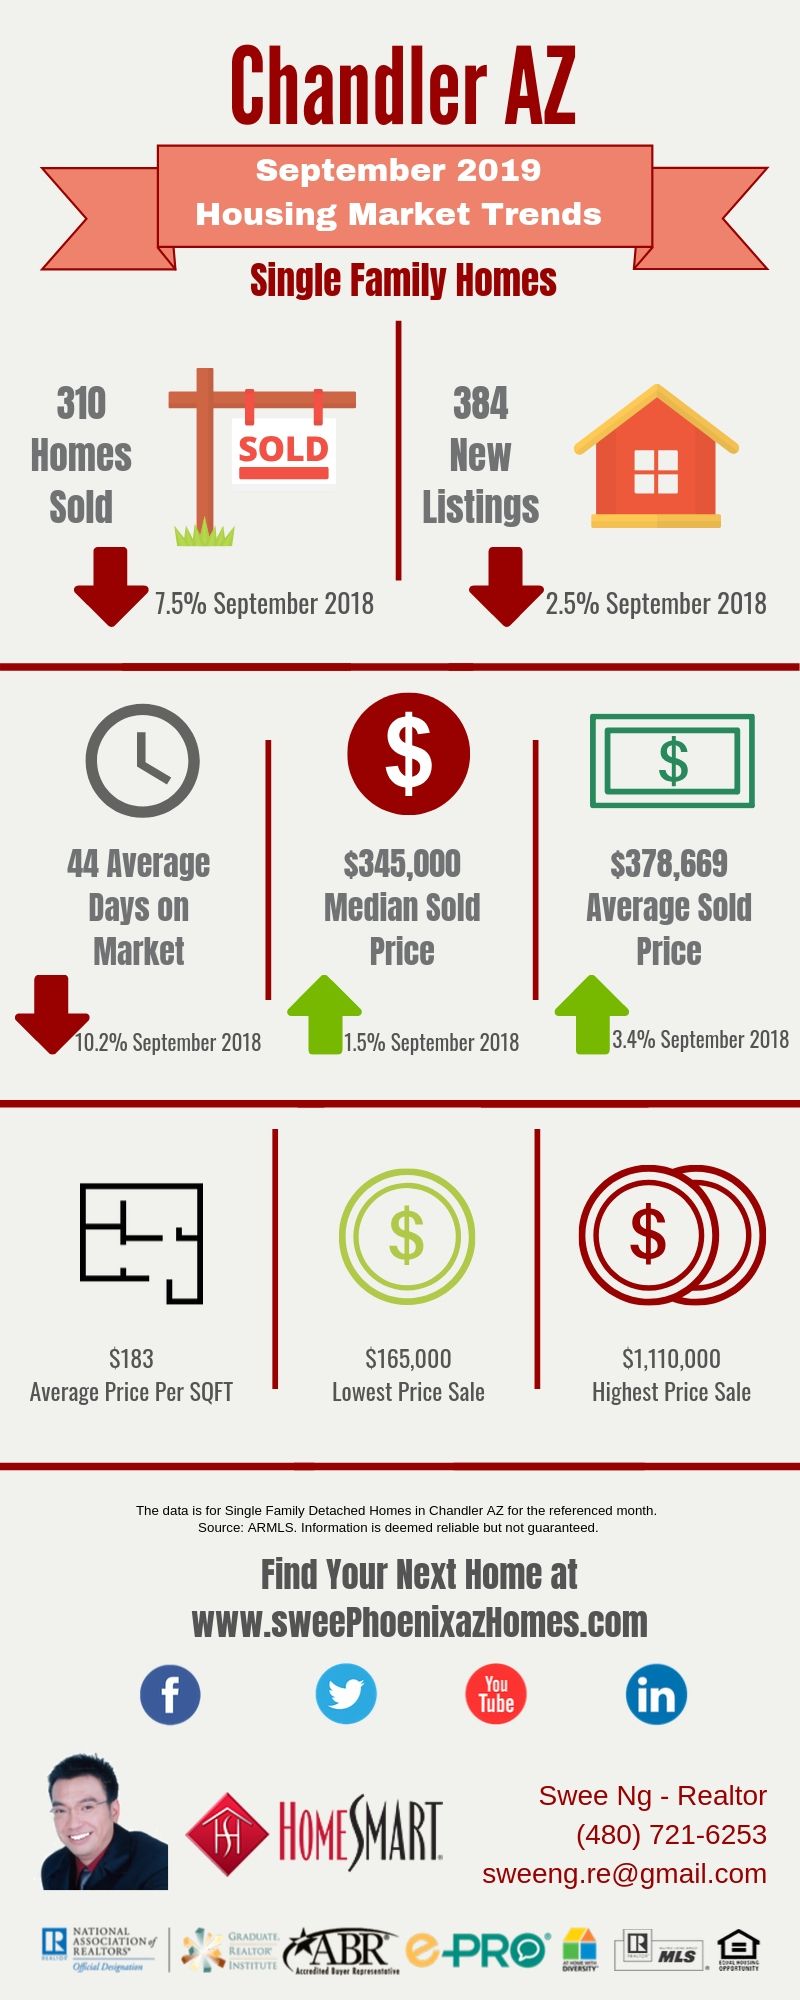 September 2019 Chandler AZ Housing Market Update by Swee Ng, House Value and Real Estate Listings